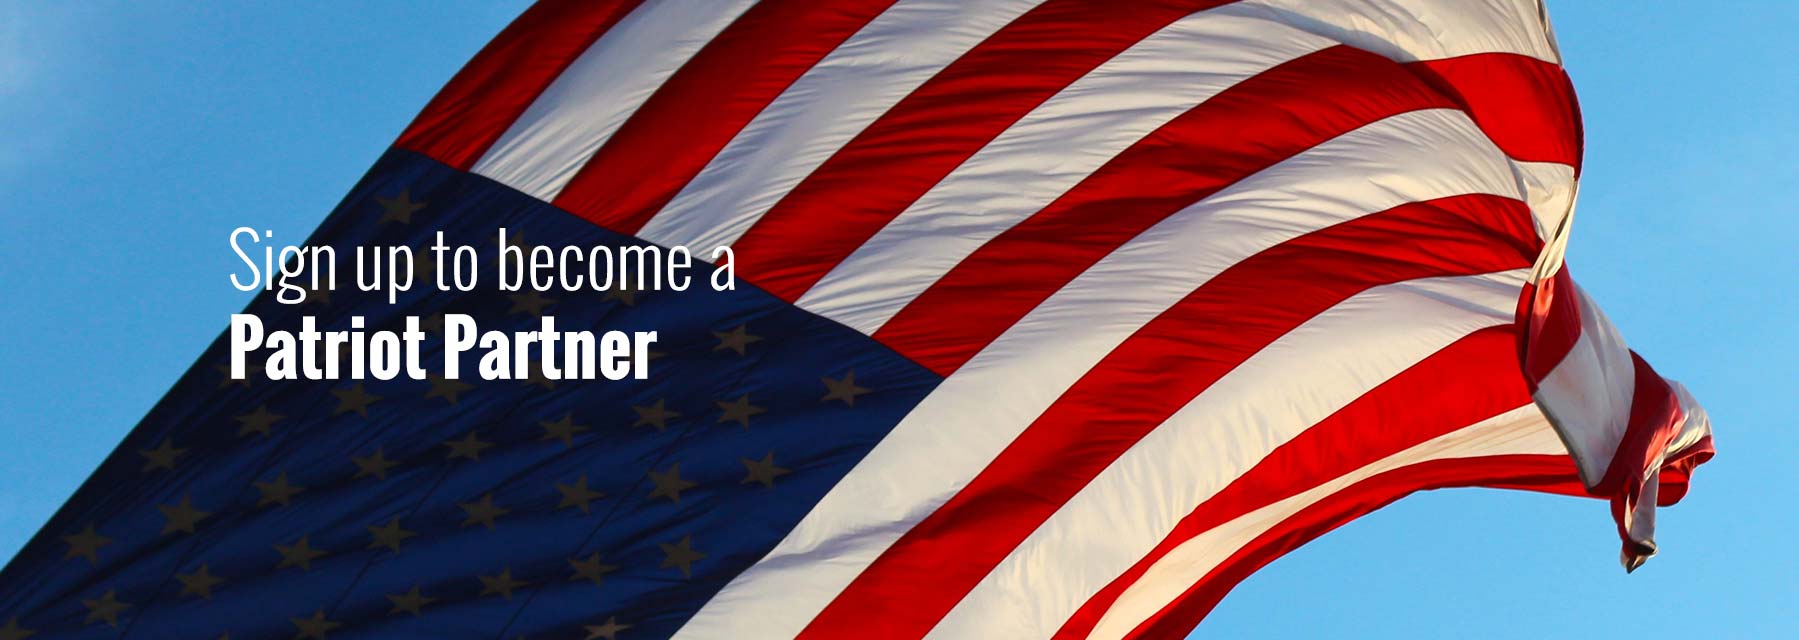 Sign up to become a Patriot Partner